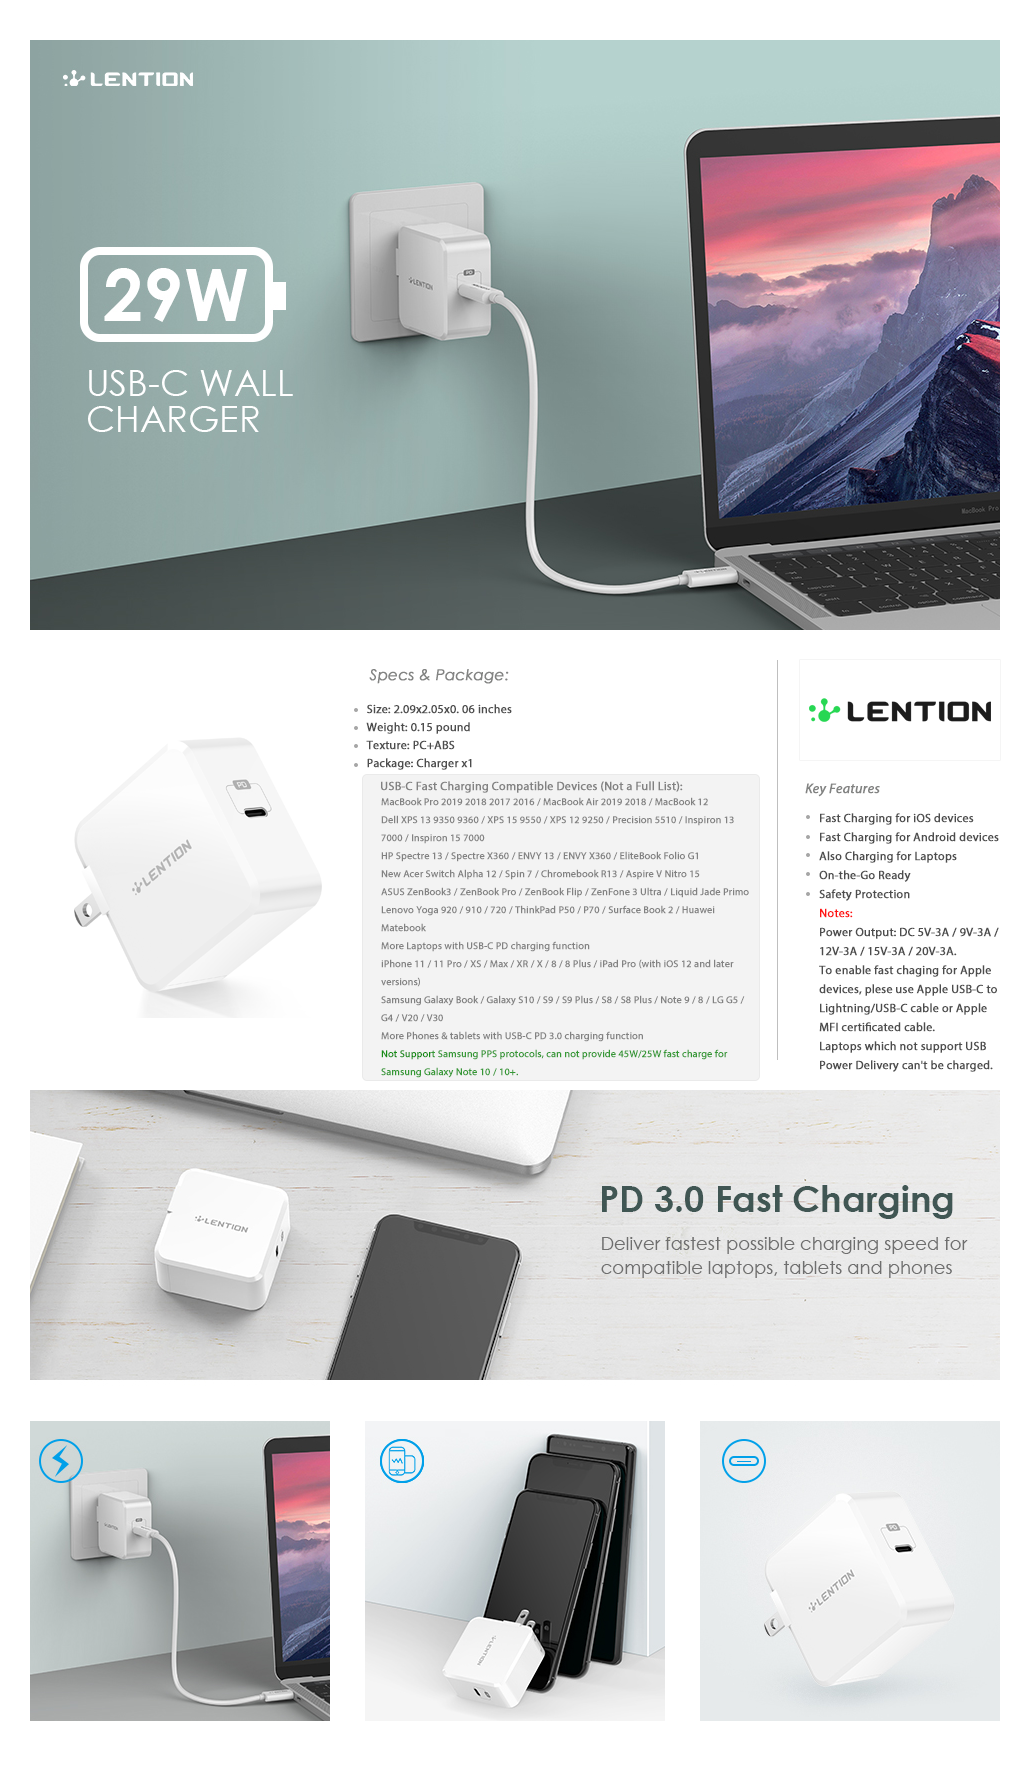 Lention 29w Usb C Wall Charger Lention